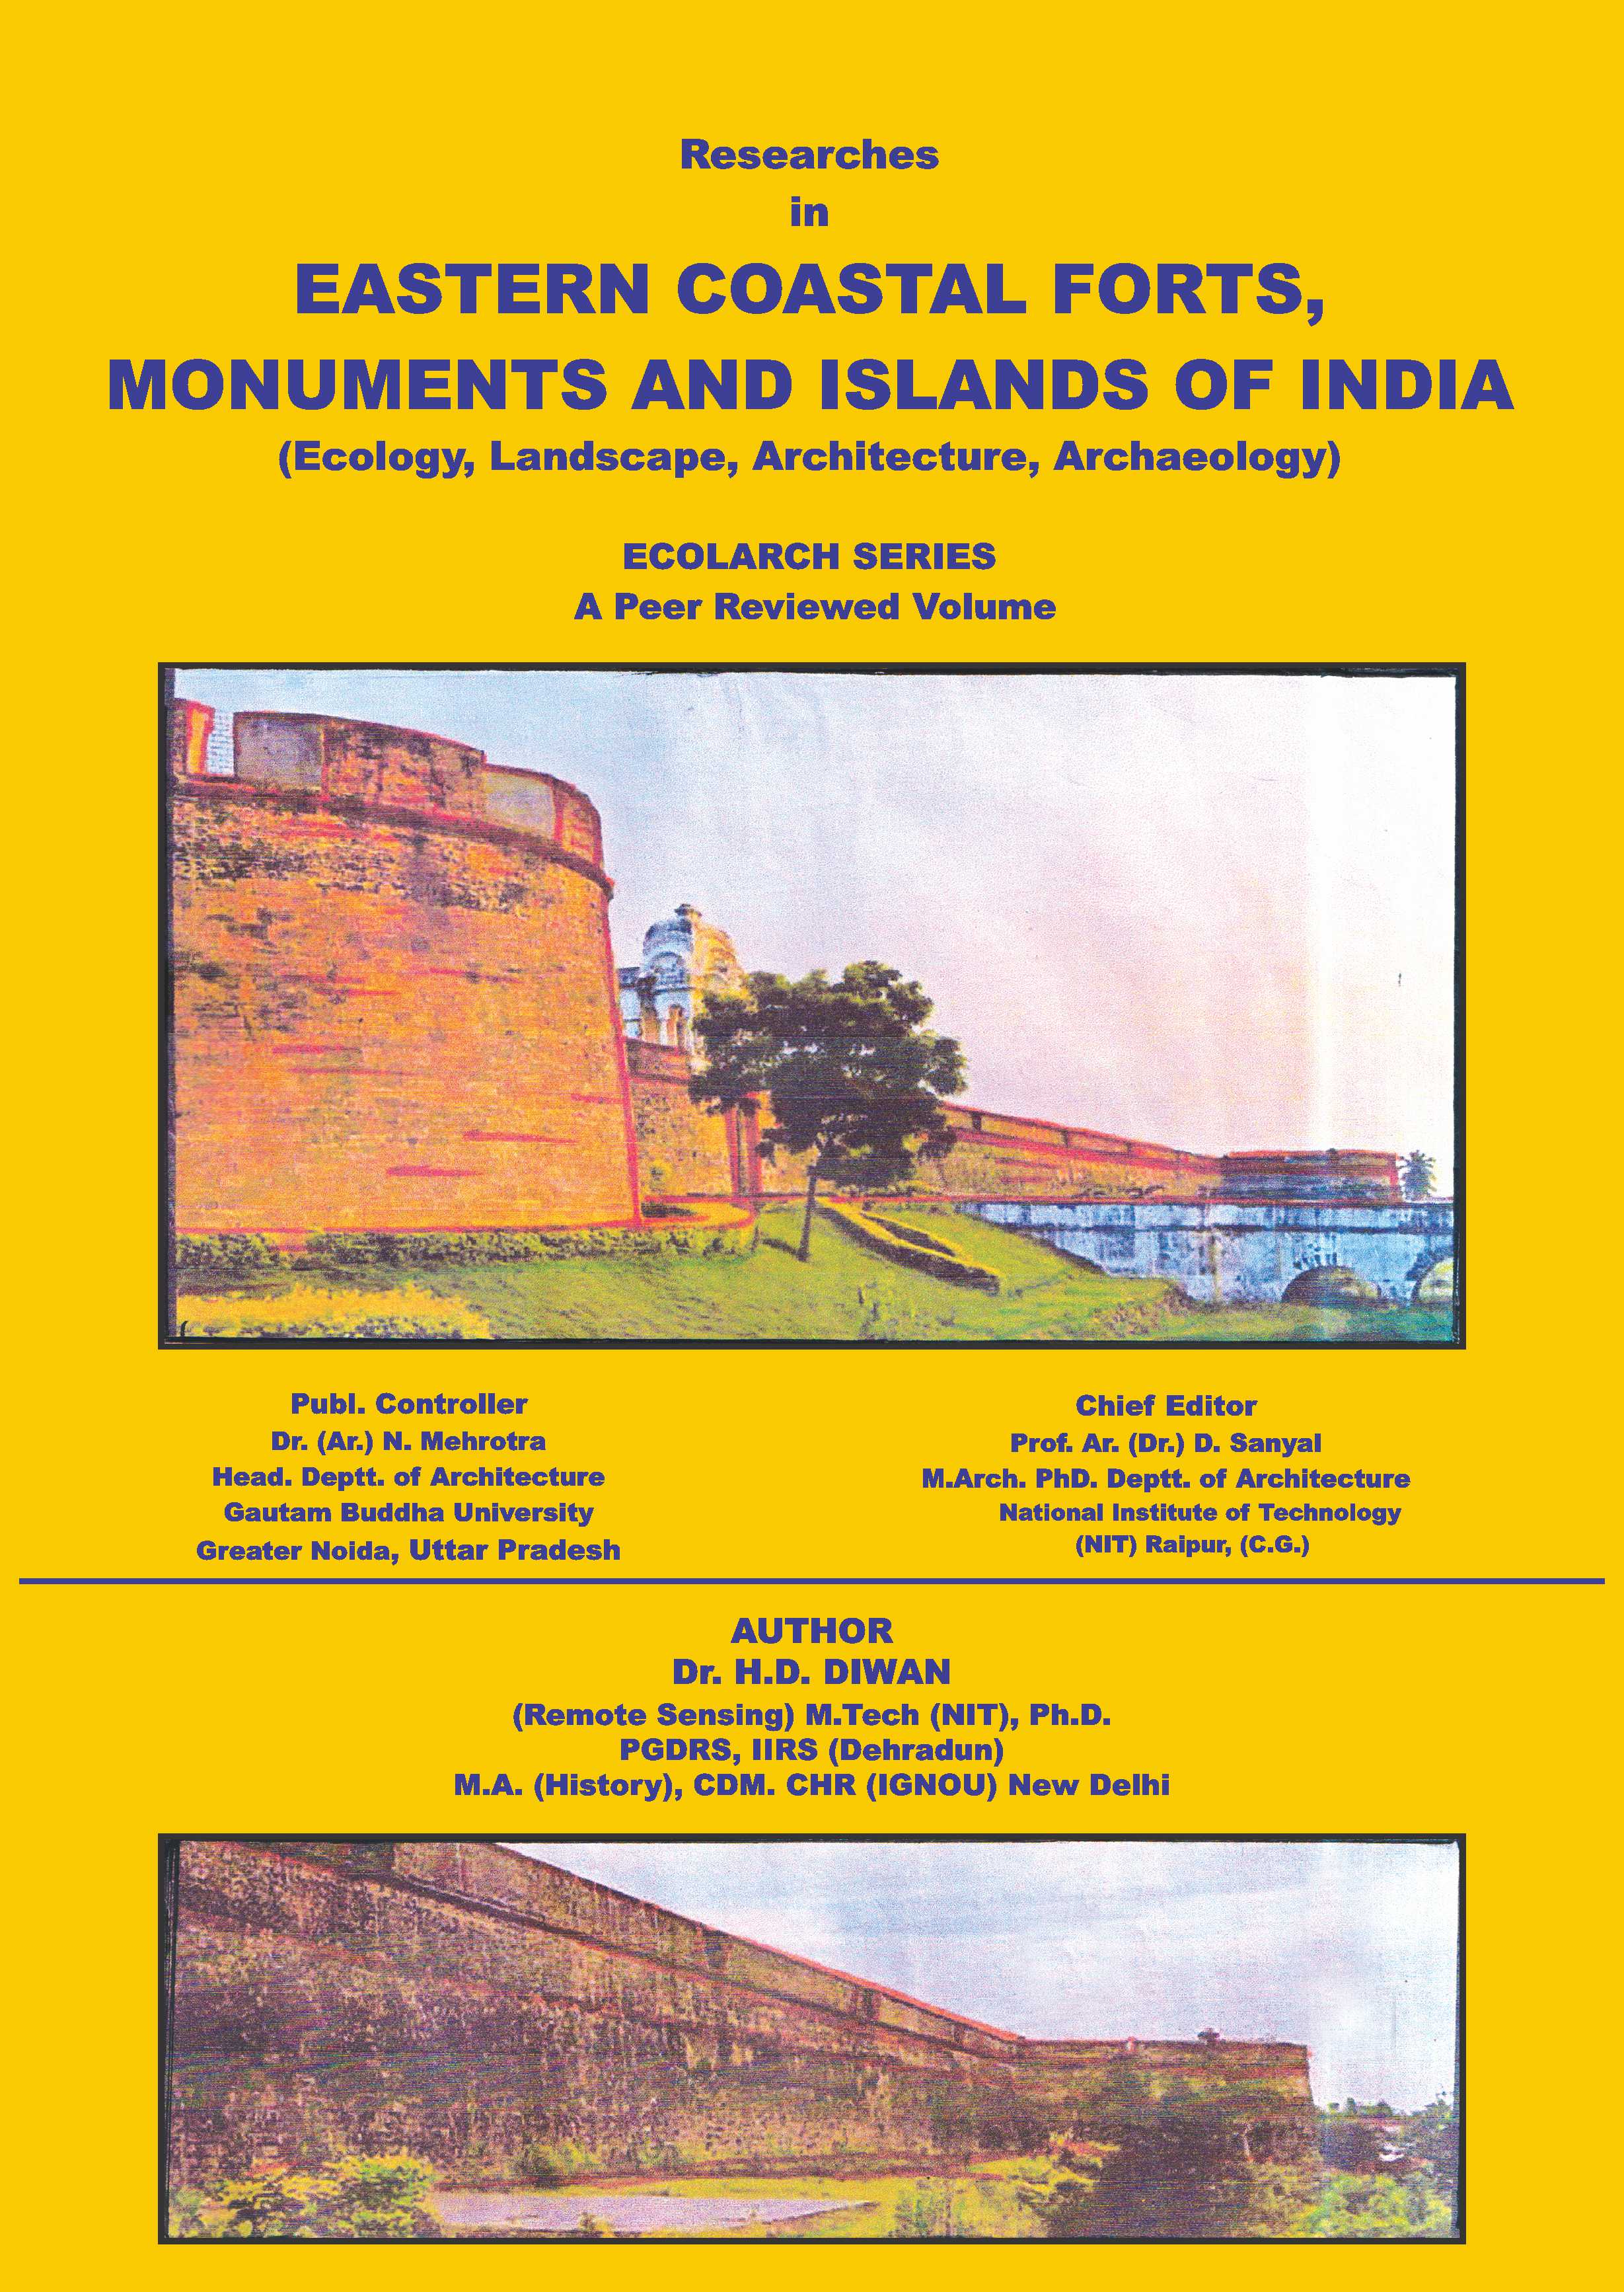 Researches in Eastern Coastal Forts, Monuments and Islands of India (Ecolarch Series)